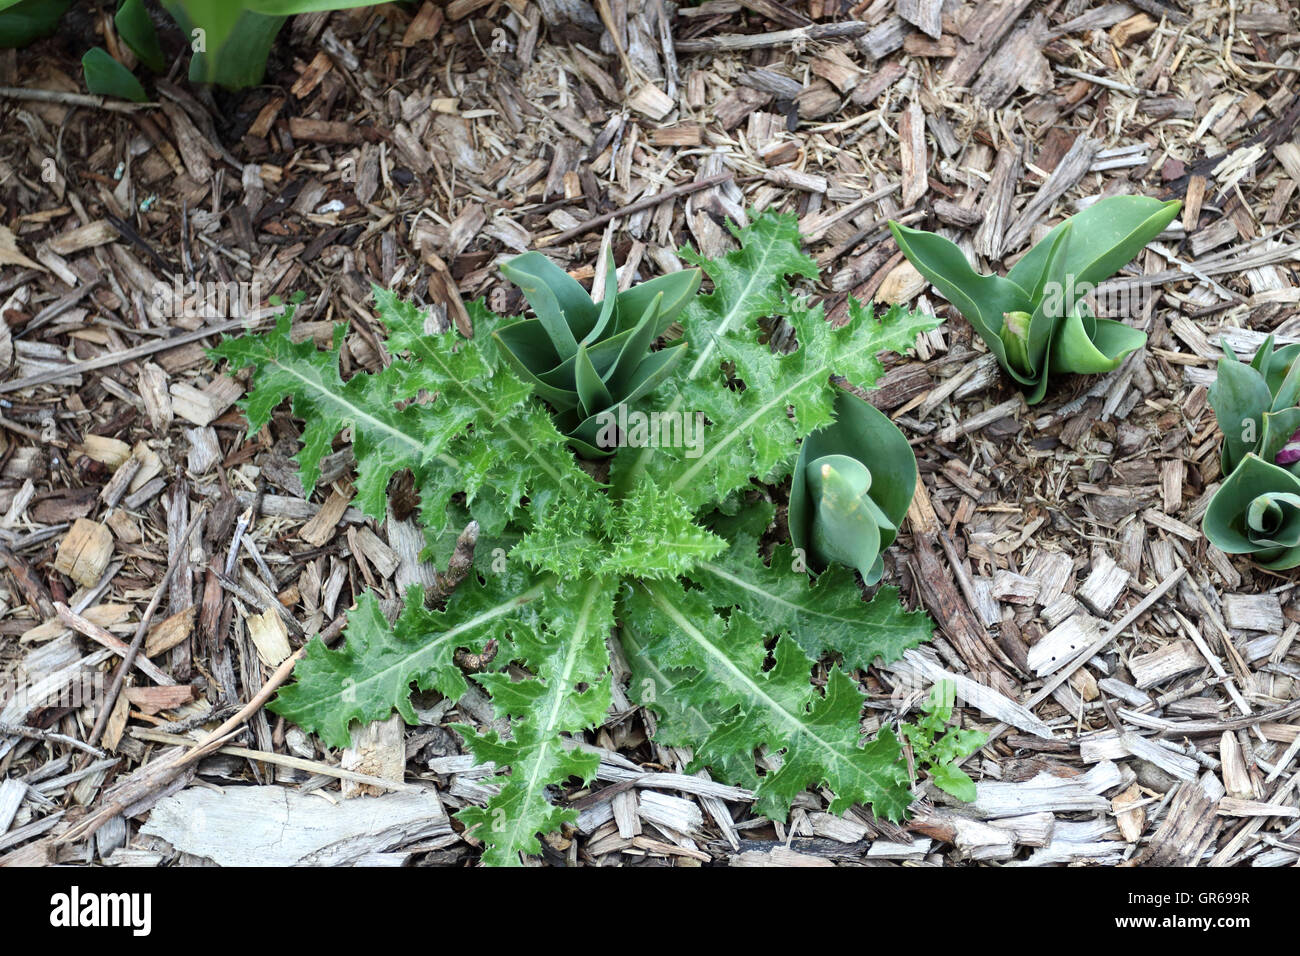 Sonchus asper or also known as Prickly Sow Thistle leaf Stock Photo